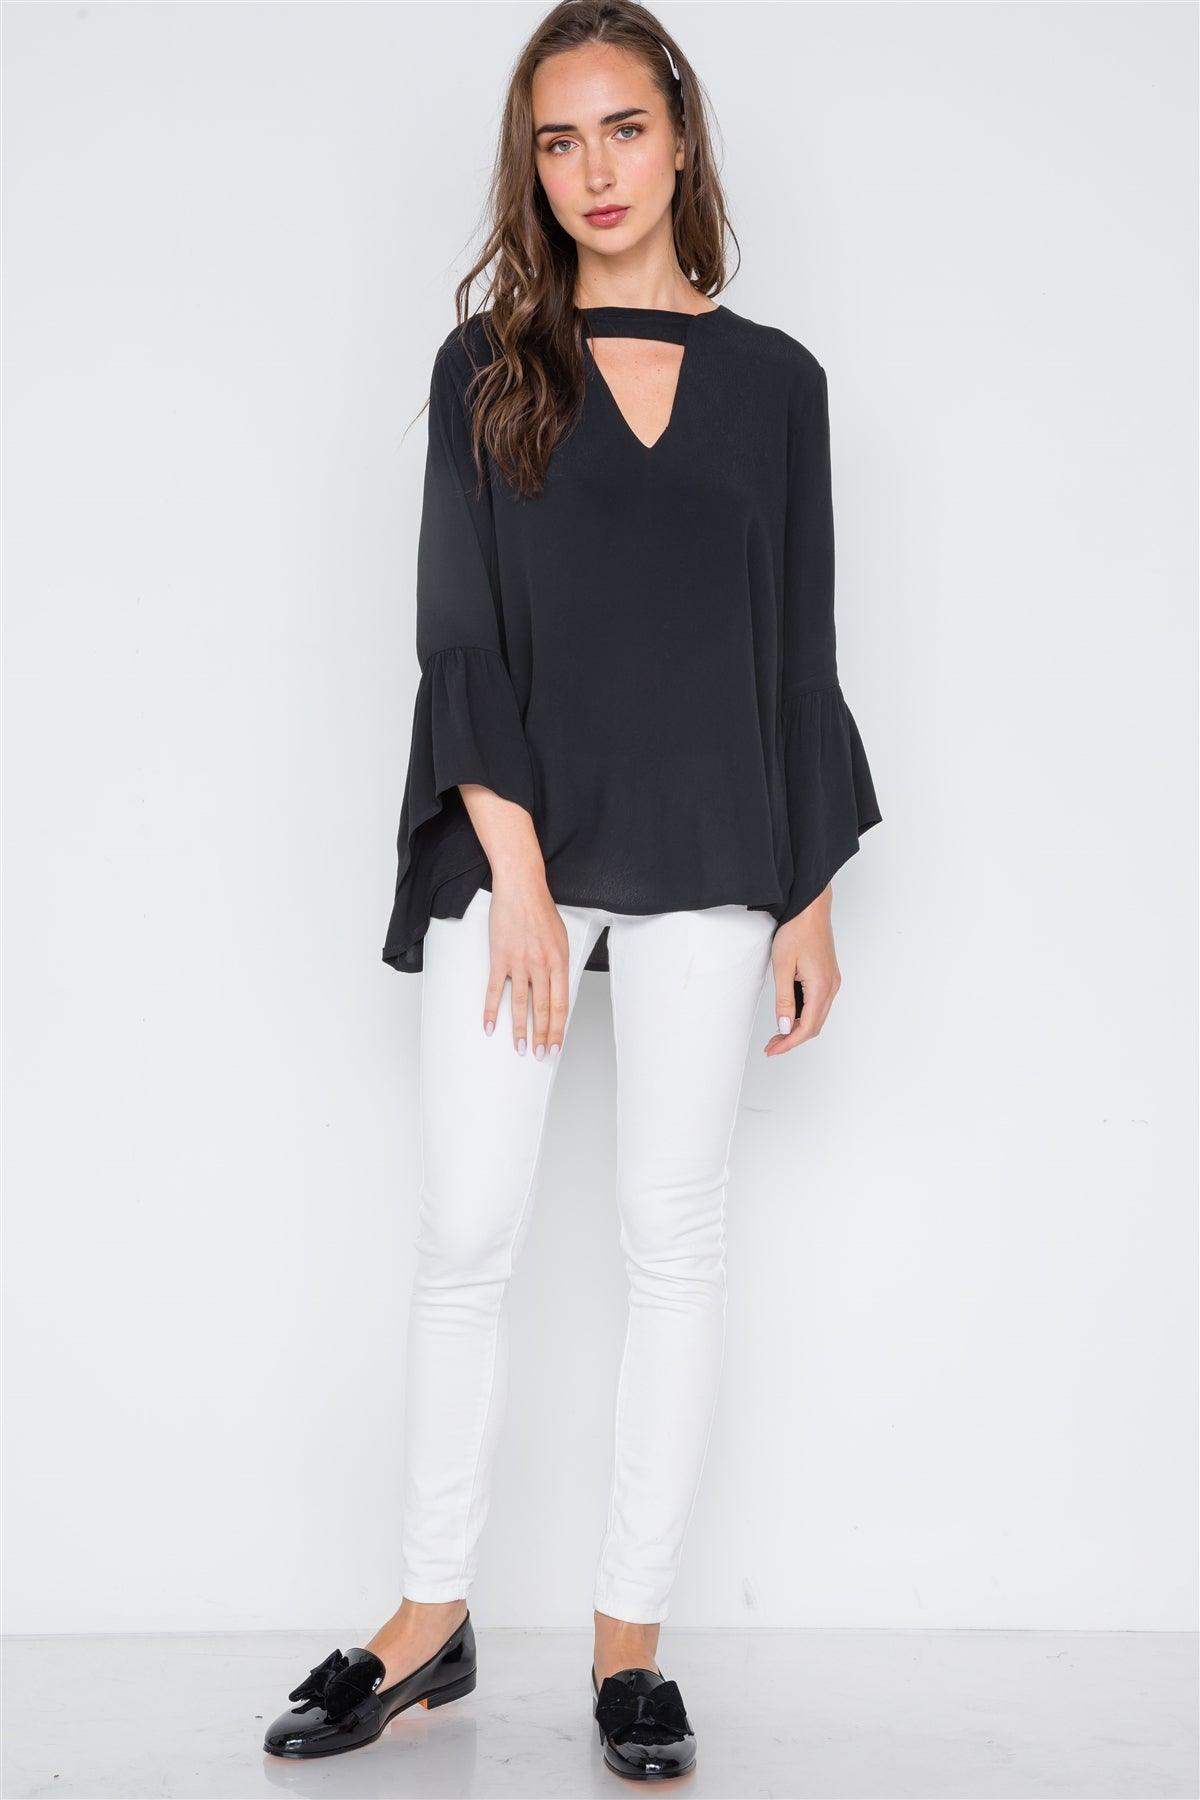 Black V-Cut Out Long Bell Sleeve Solid Top /2-1-2